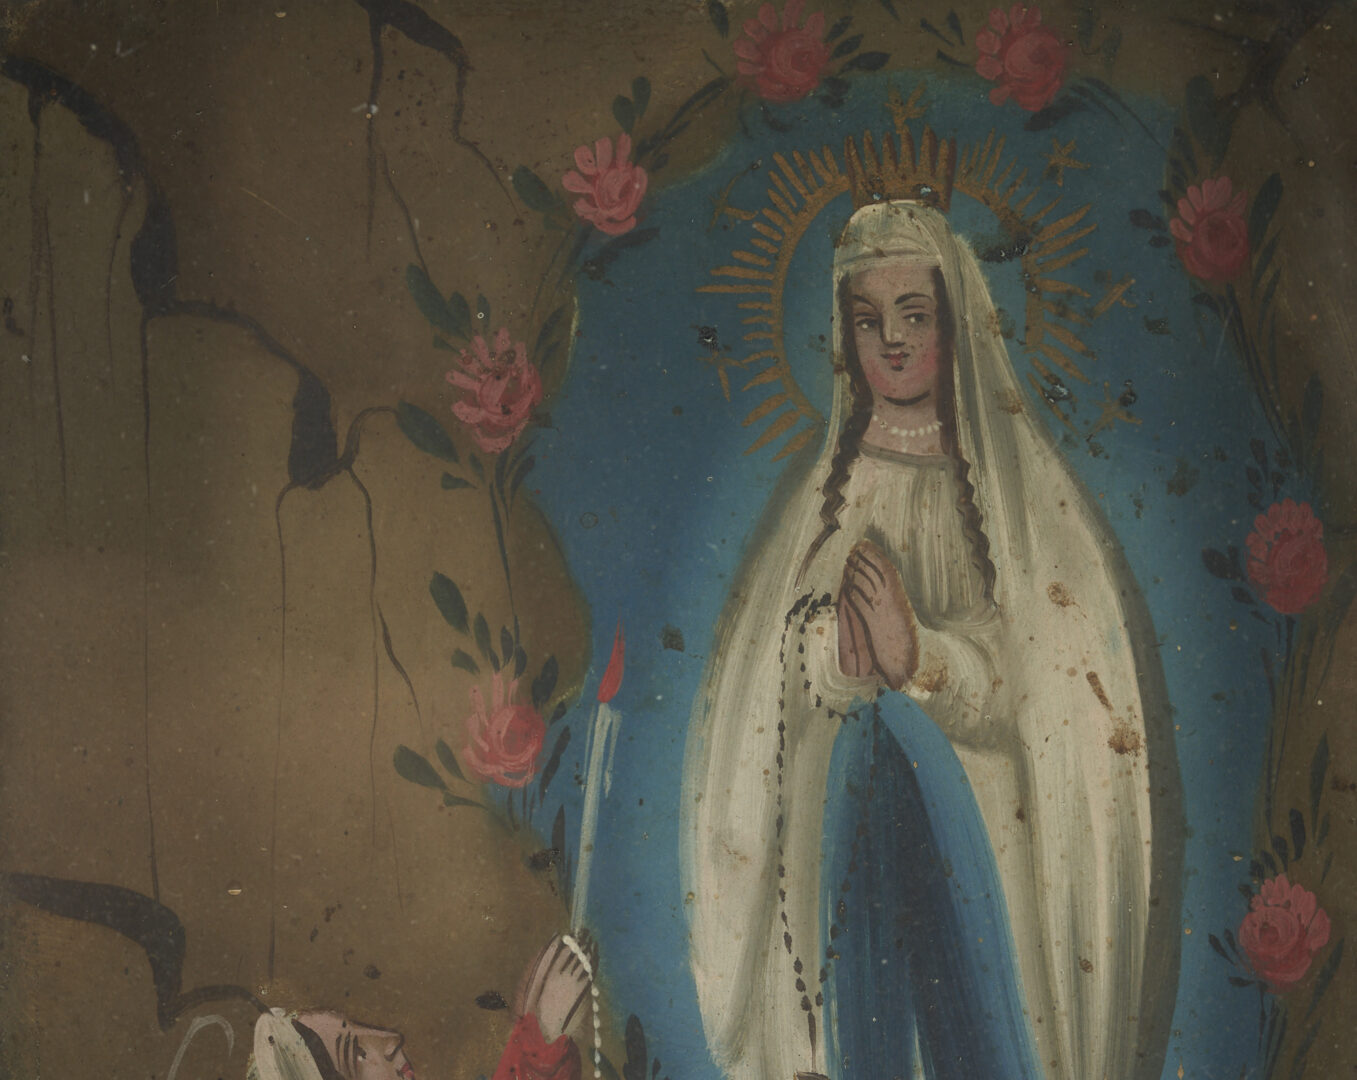 Lot 360: 2 Mexican Retablos, Our Lady of Guadalupe & Our Lady of Sorrows